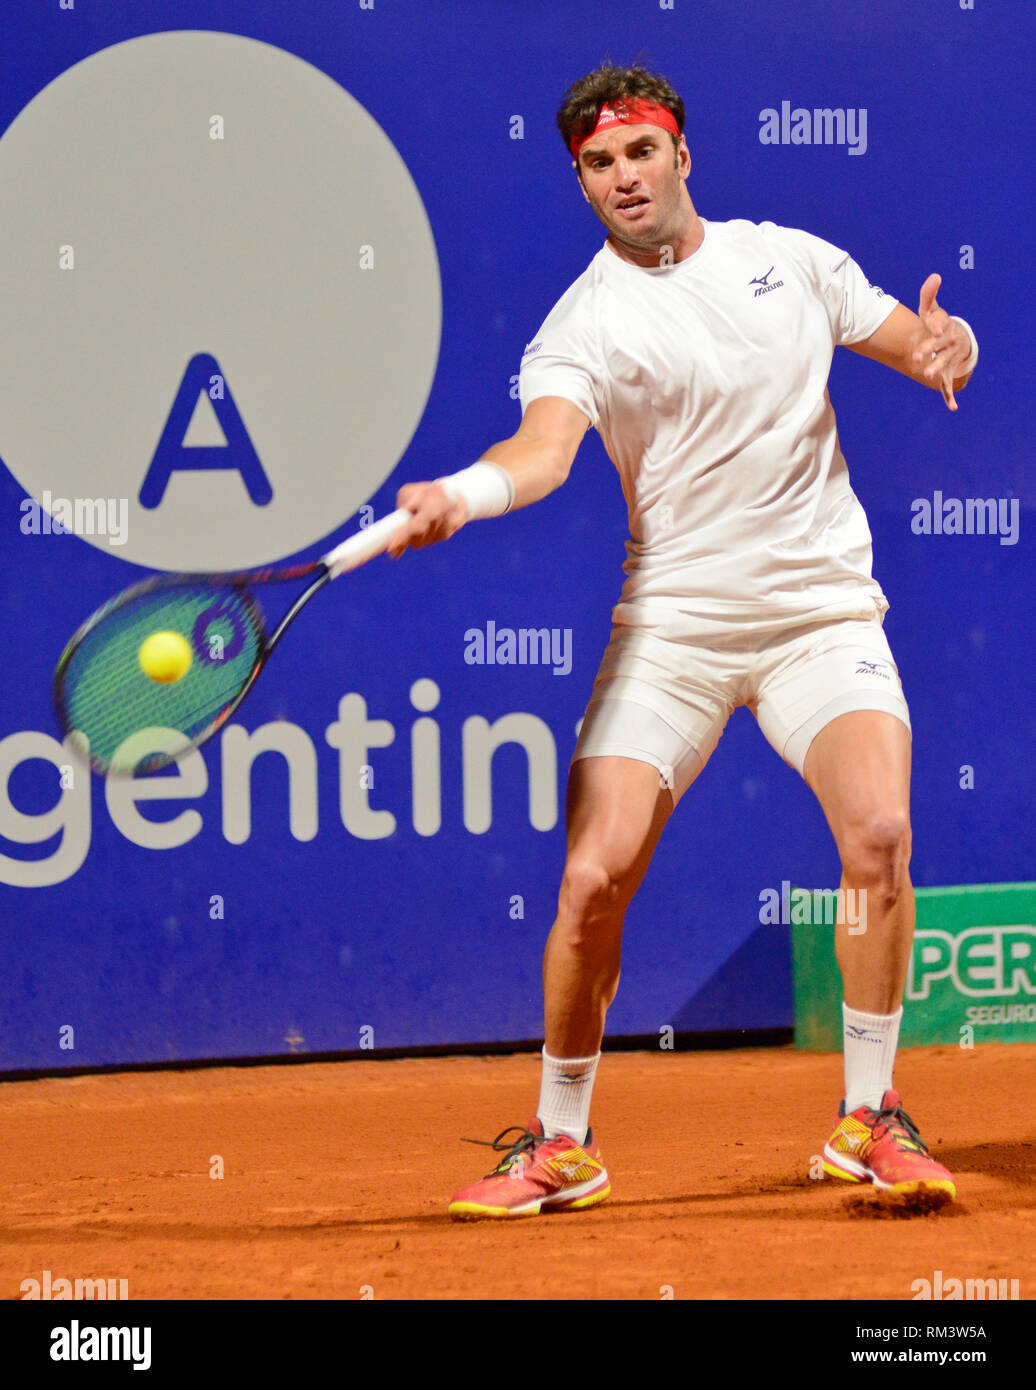 Buenos Aires, Argentina. 12th Feb 2019. Malek Jaziri (Tunisia) lost against David Ferrer (Spain) in the Argentina Open, an ATP 250 tennis tournament Credit: Mariano Garcia/Alamy Live News Stock Photo